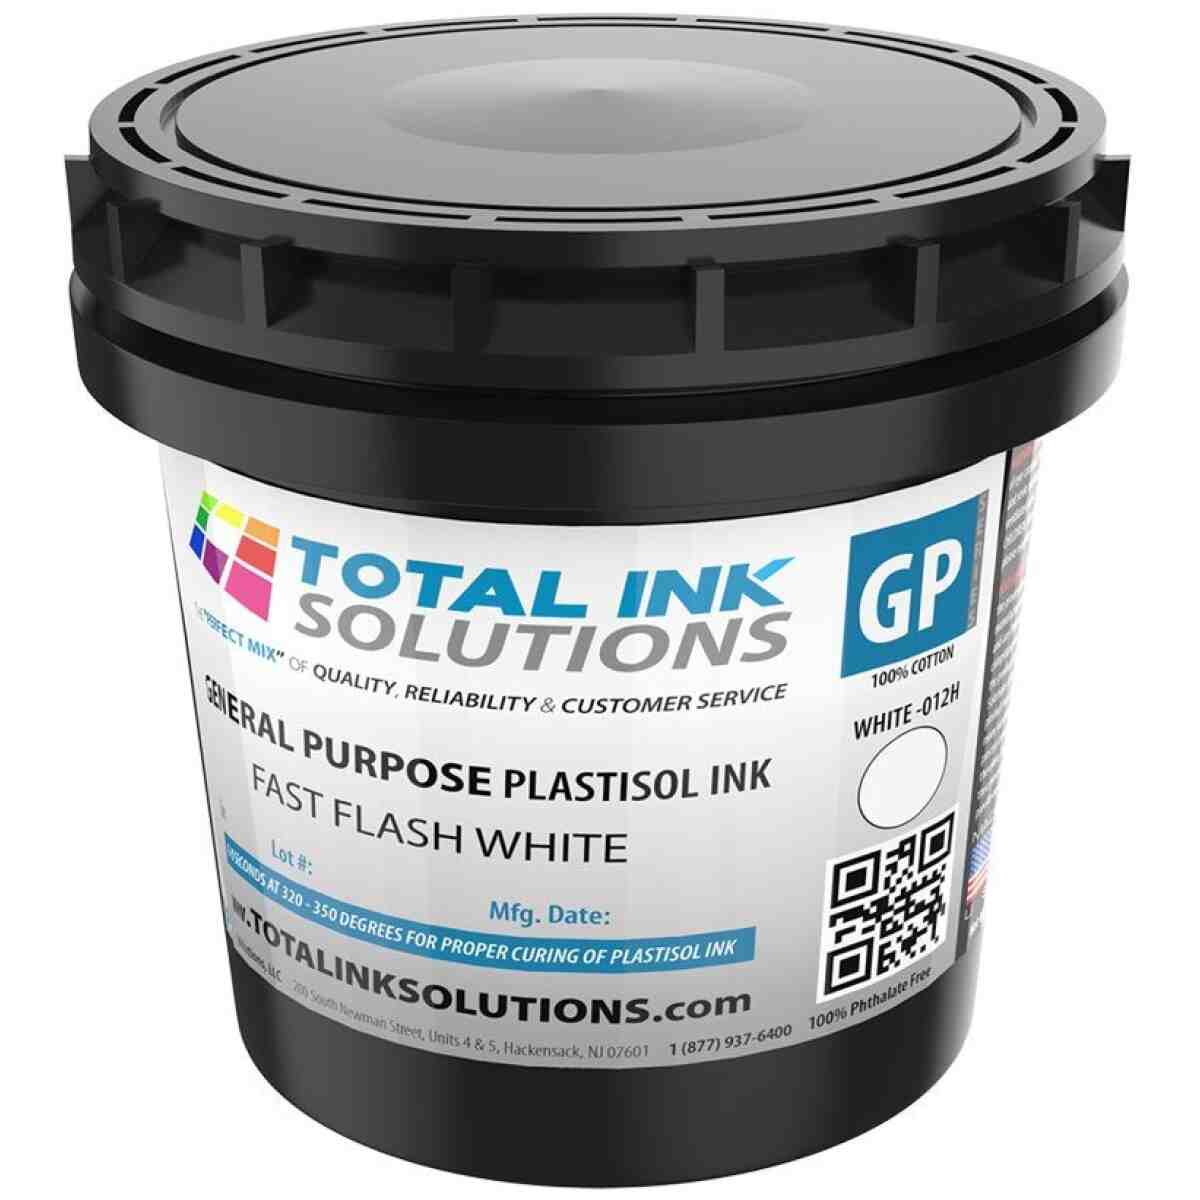 General Purpose Plastisol Ink - Fast Flash White - Pint TOTAL INK SOLUTIONS®